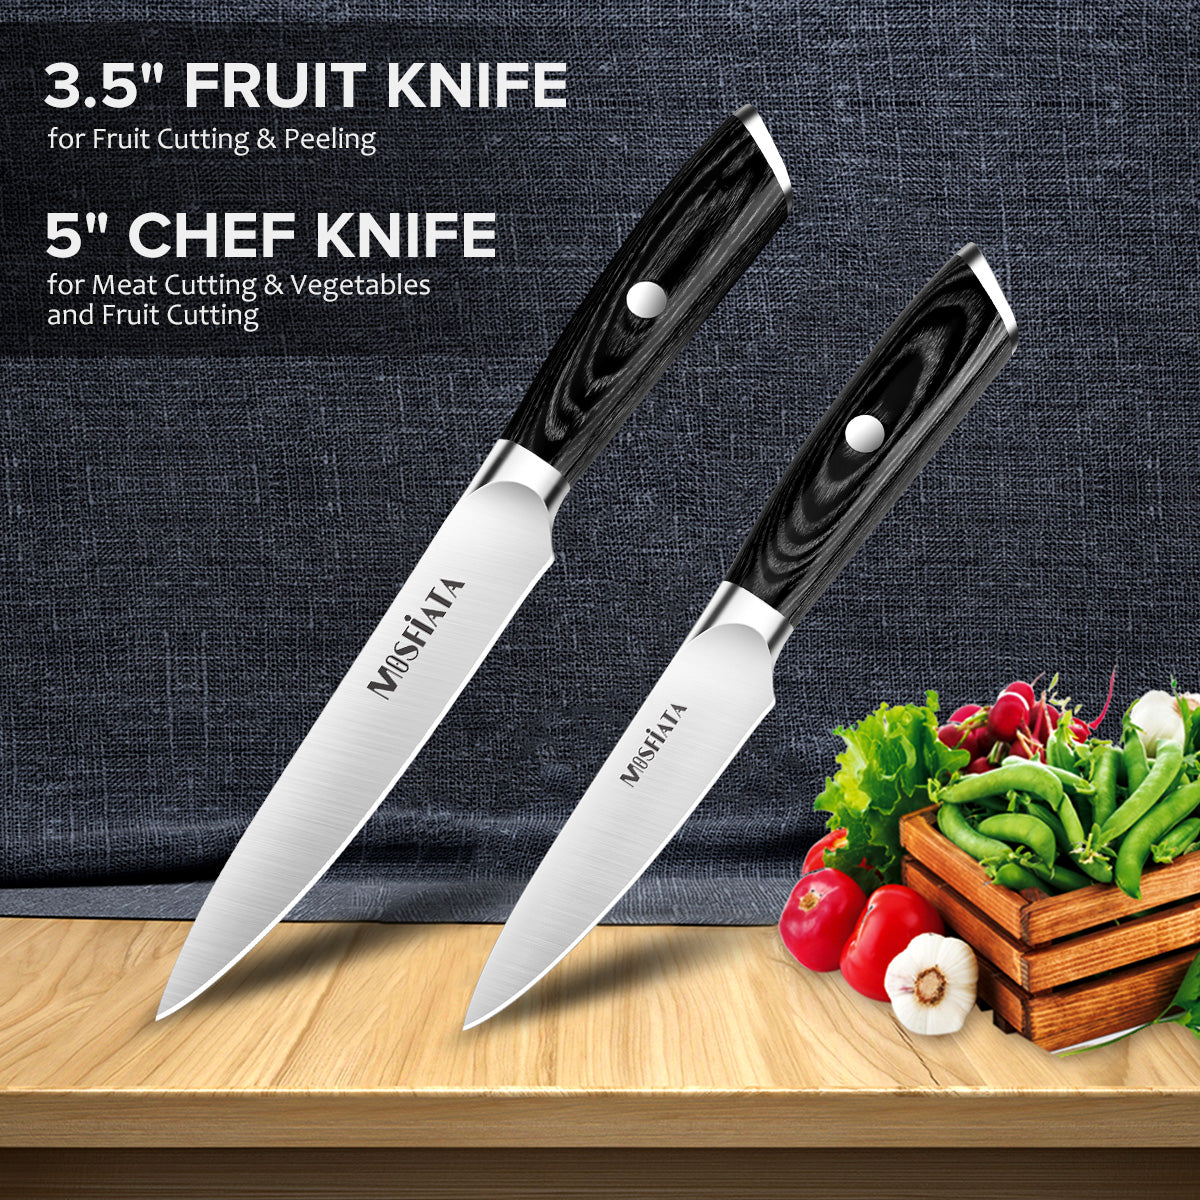 MOSFiATA Chef Knife 8 Inch Kitchen Cooking Knife, 5Cr15Mov High Carbon  Stainless Steel Sharp Knife with Ergonomic Pakkawood Handle